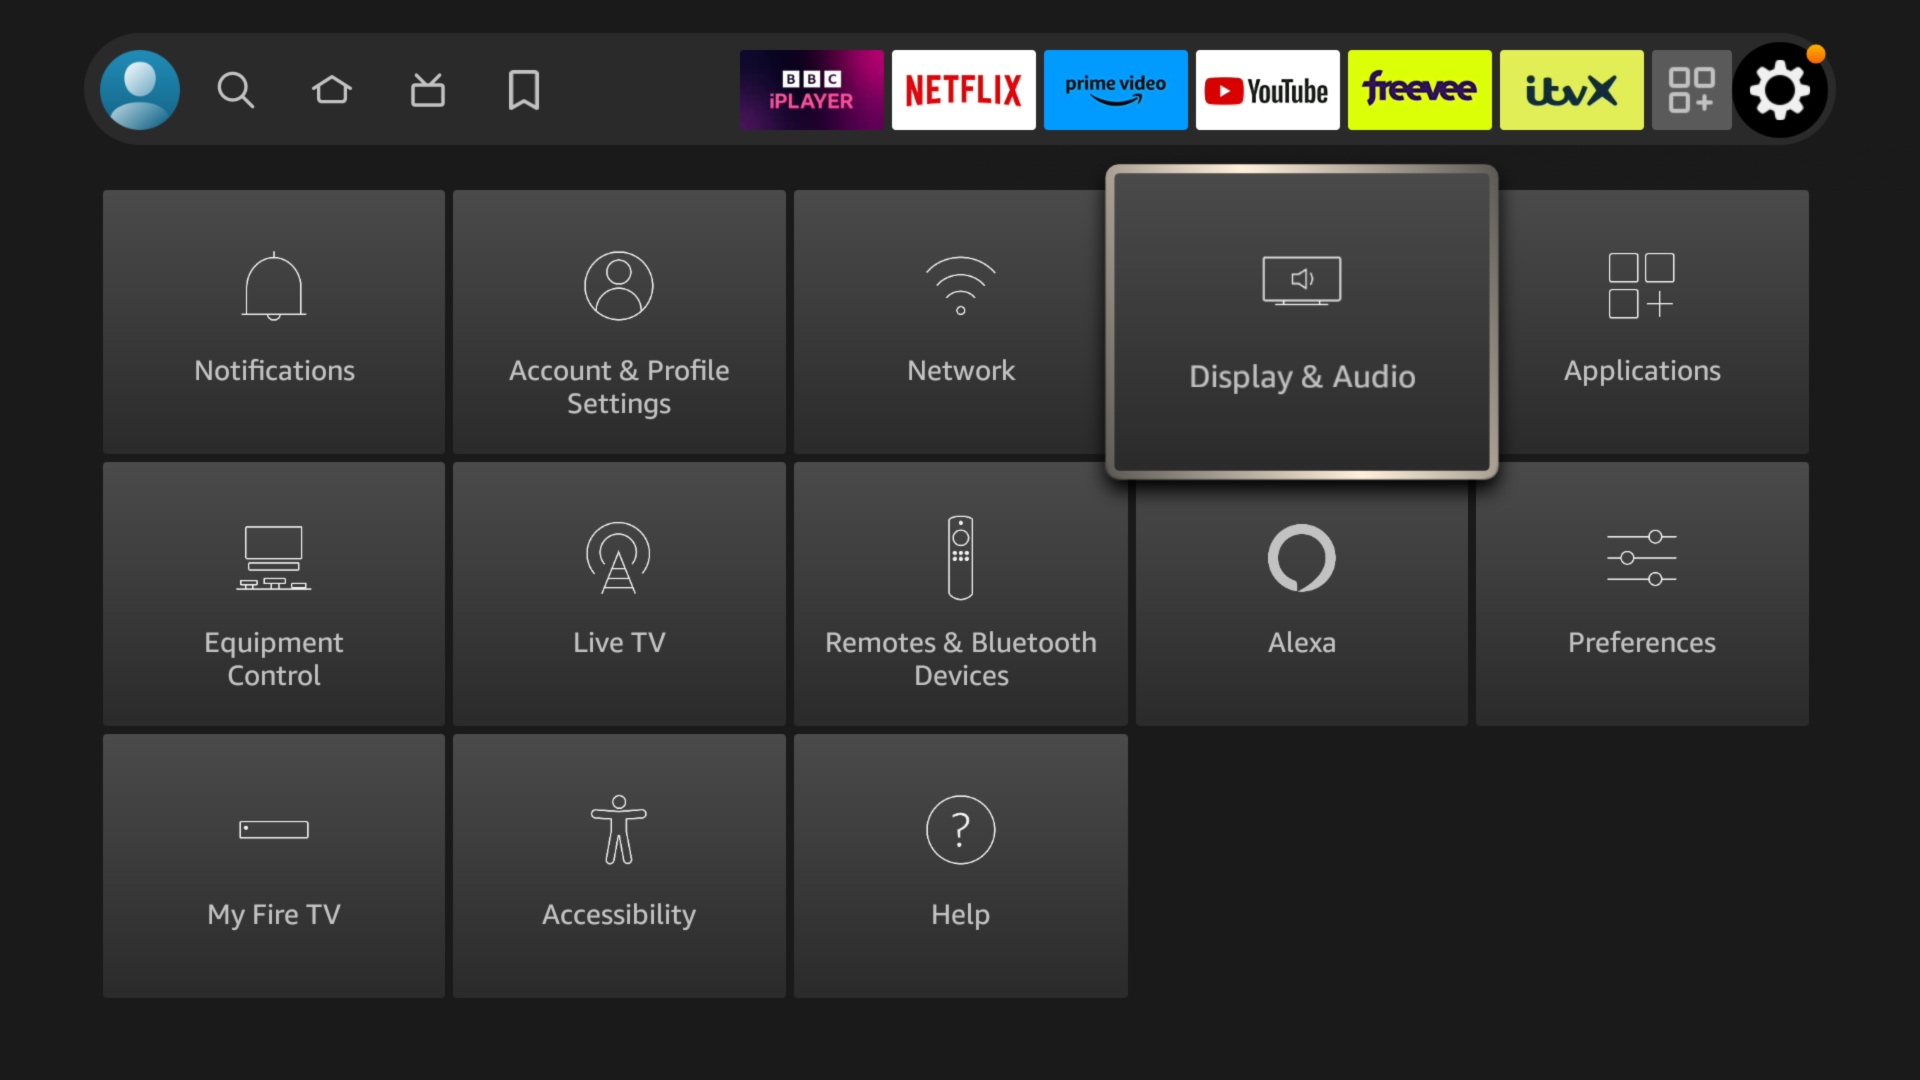 How to connect Fire TV Stick to WiFi without remote?